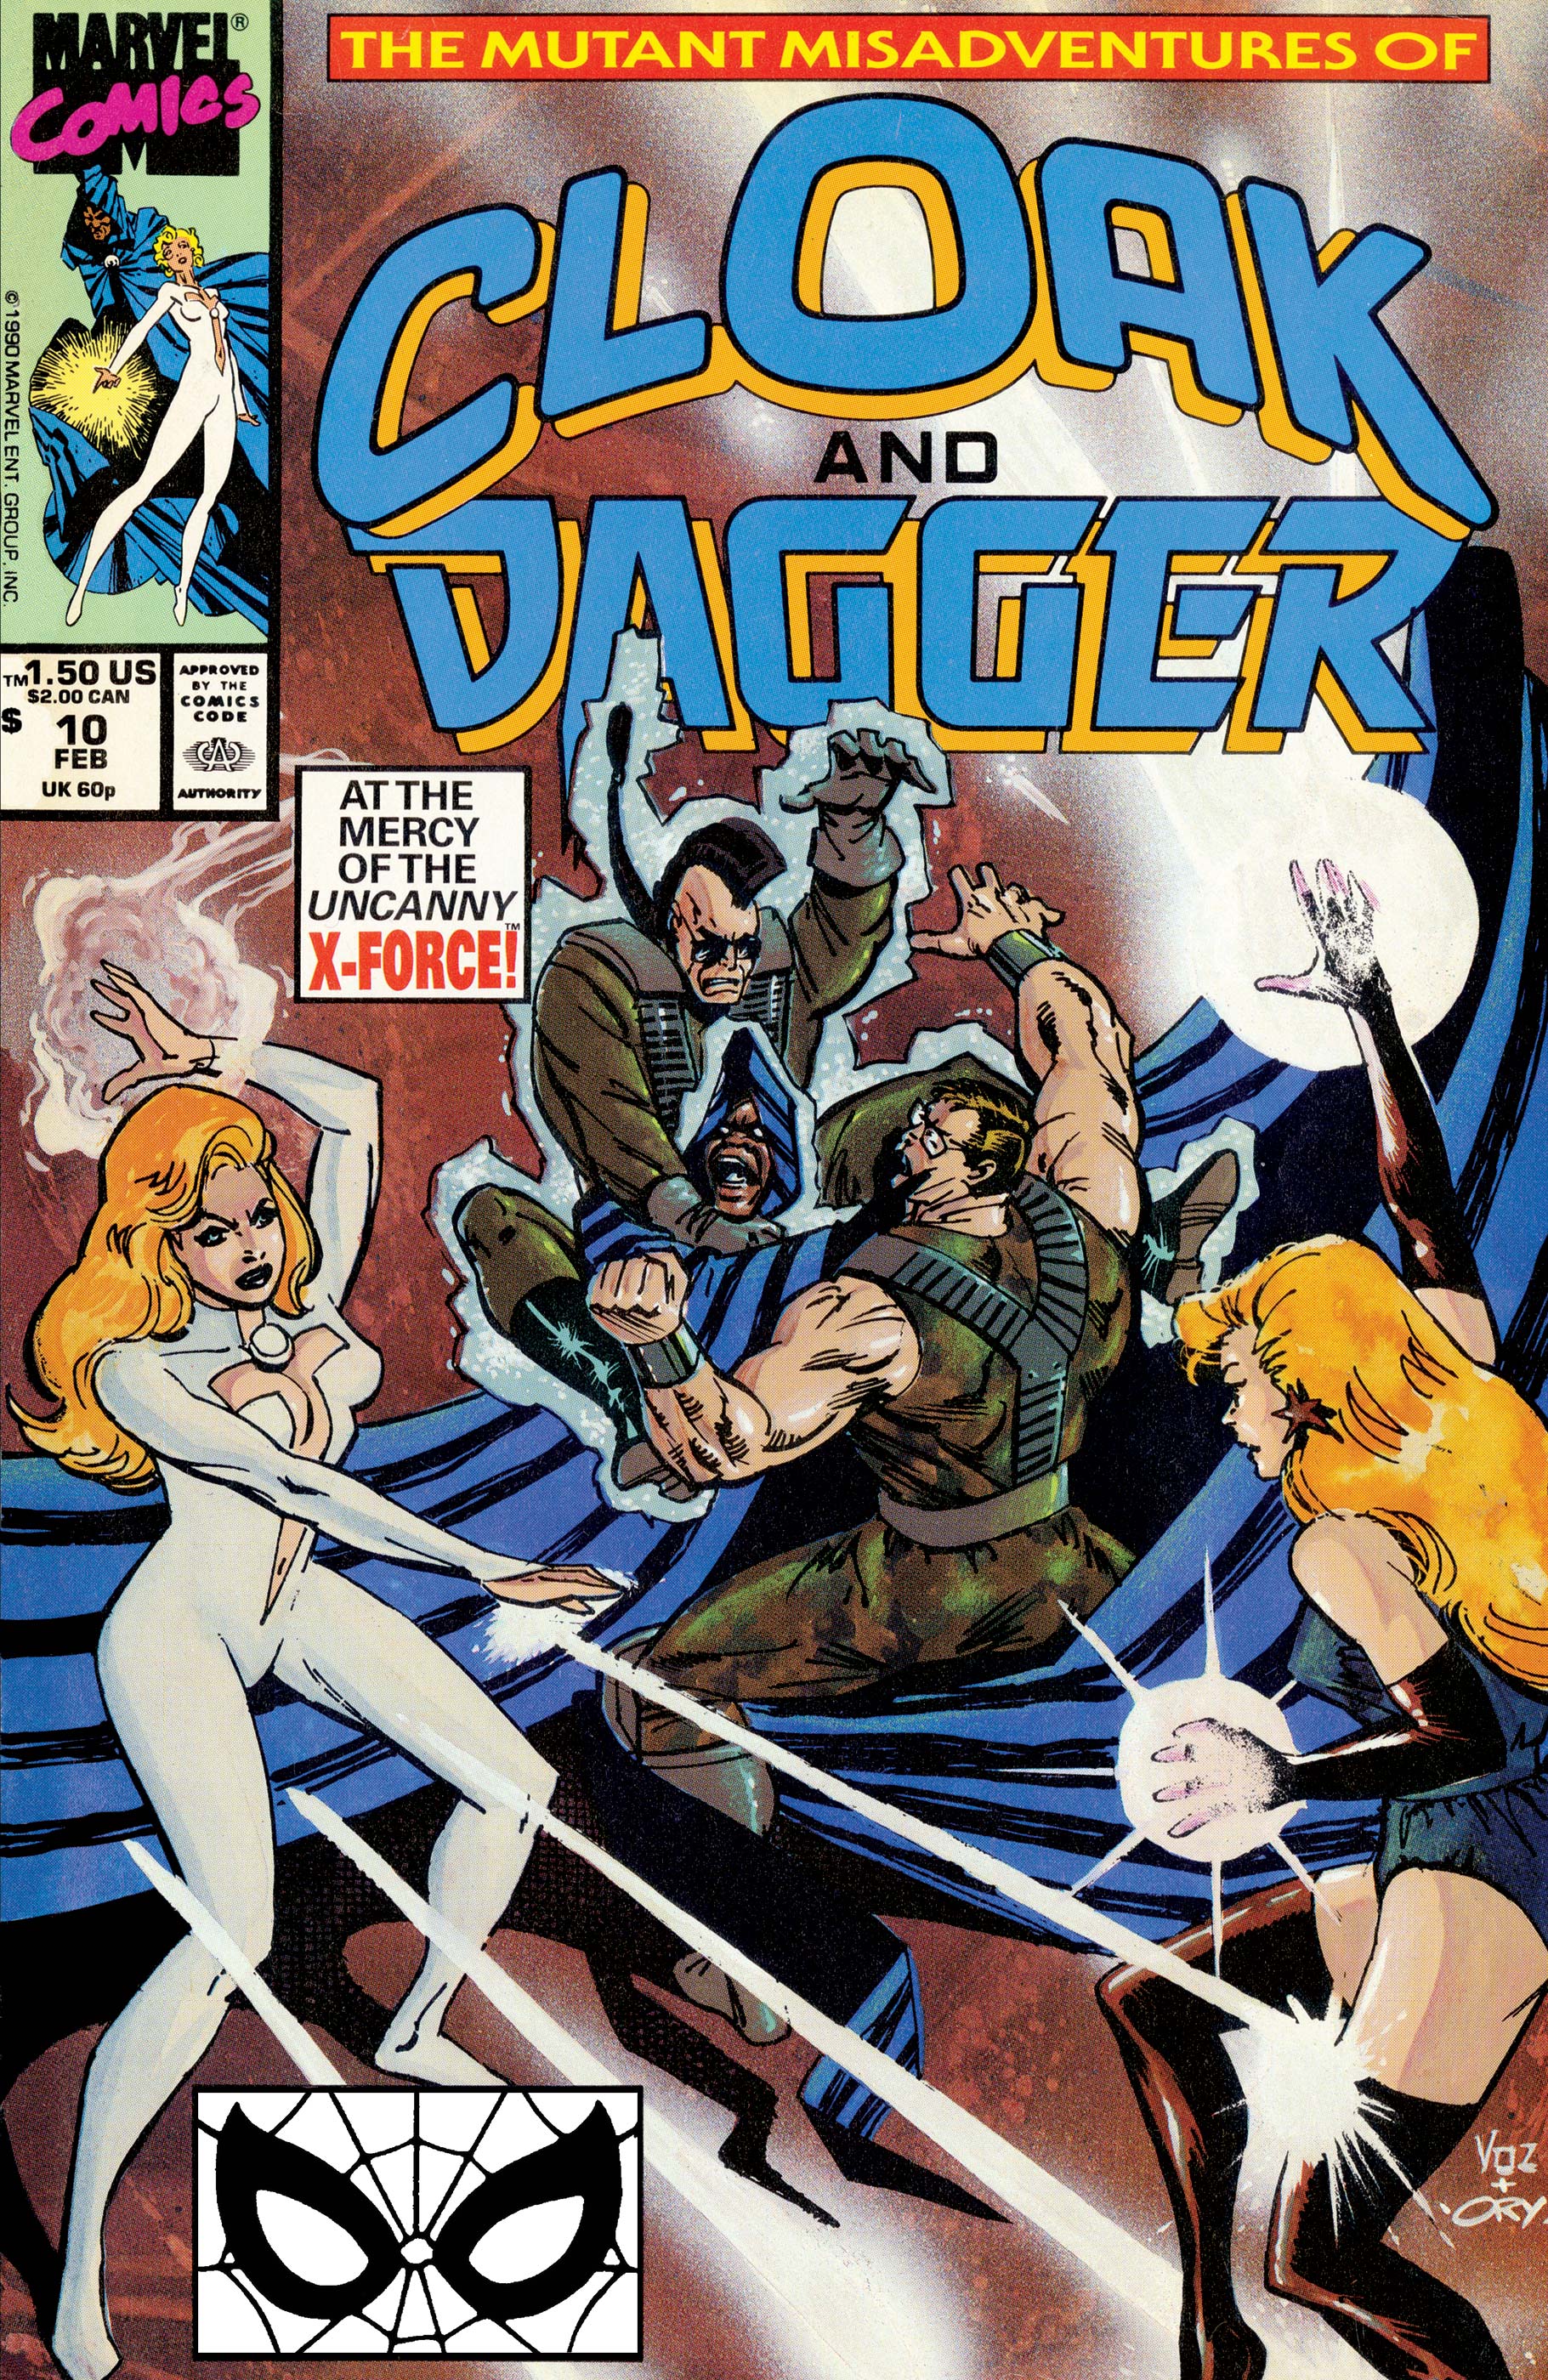 The Mutant Misadventures of Cloak and Dagger (1988) #10